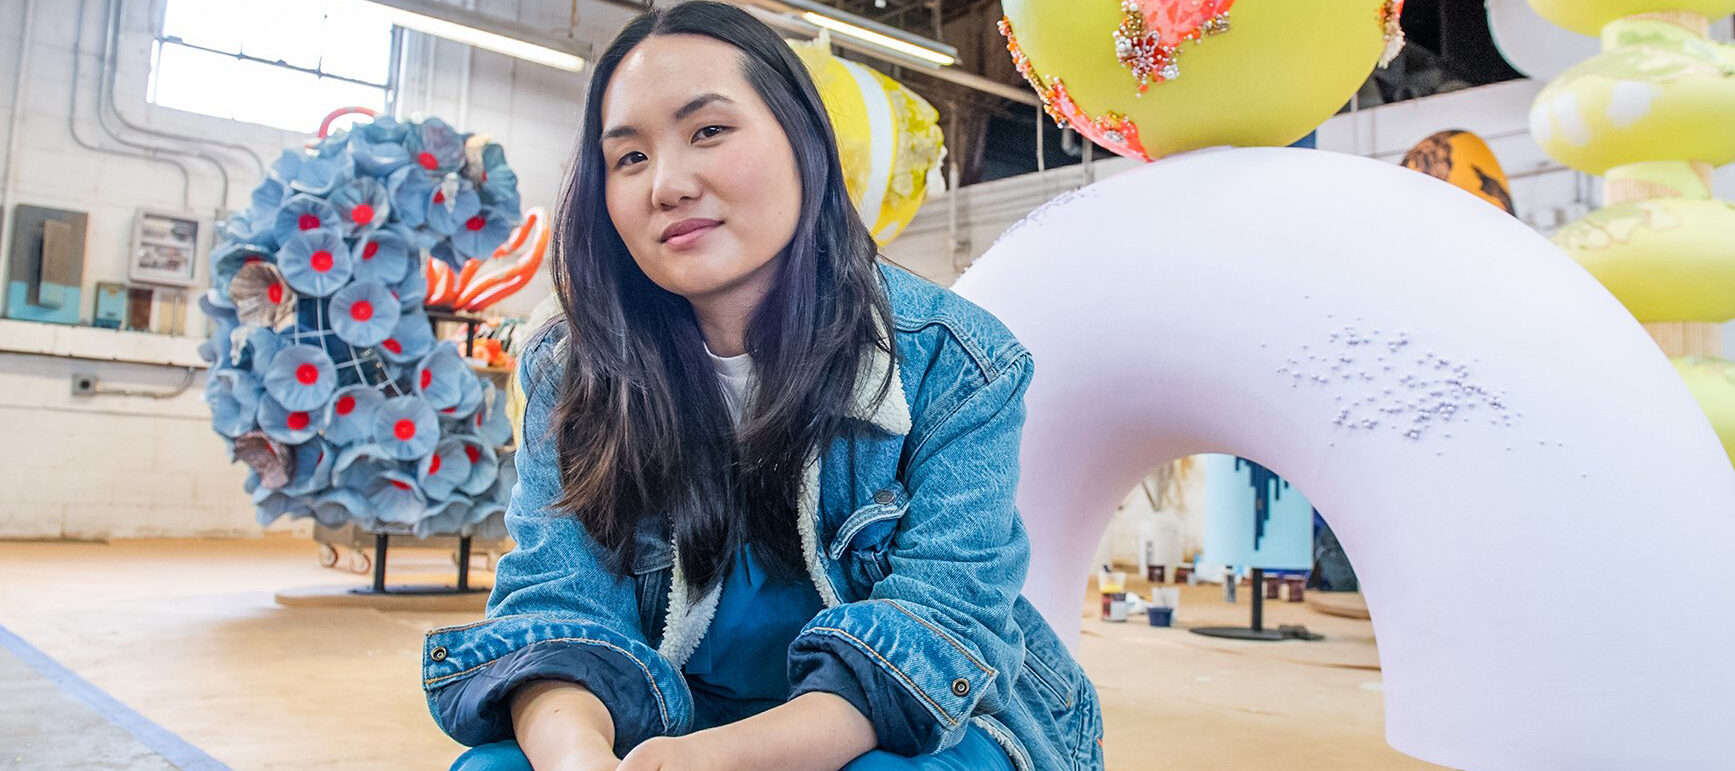 A light-skinned Asian woman sits on a stool in an industrial space. Behind her are large, colorful sculptures. She has long black hair and wears a denim coat and blue pants. She holds two paintbrushes in her hands and smiles slightly at the camera.